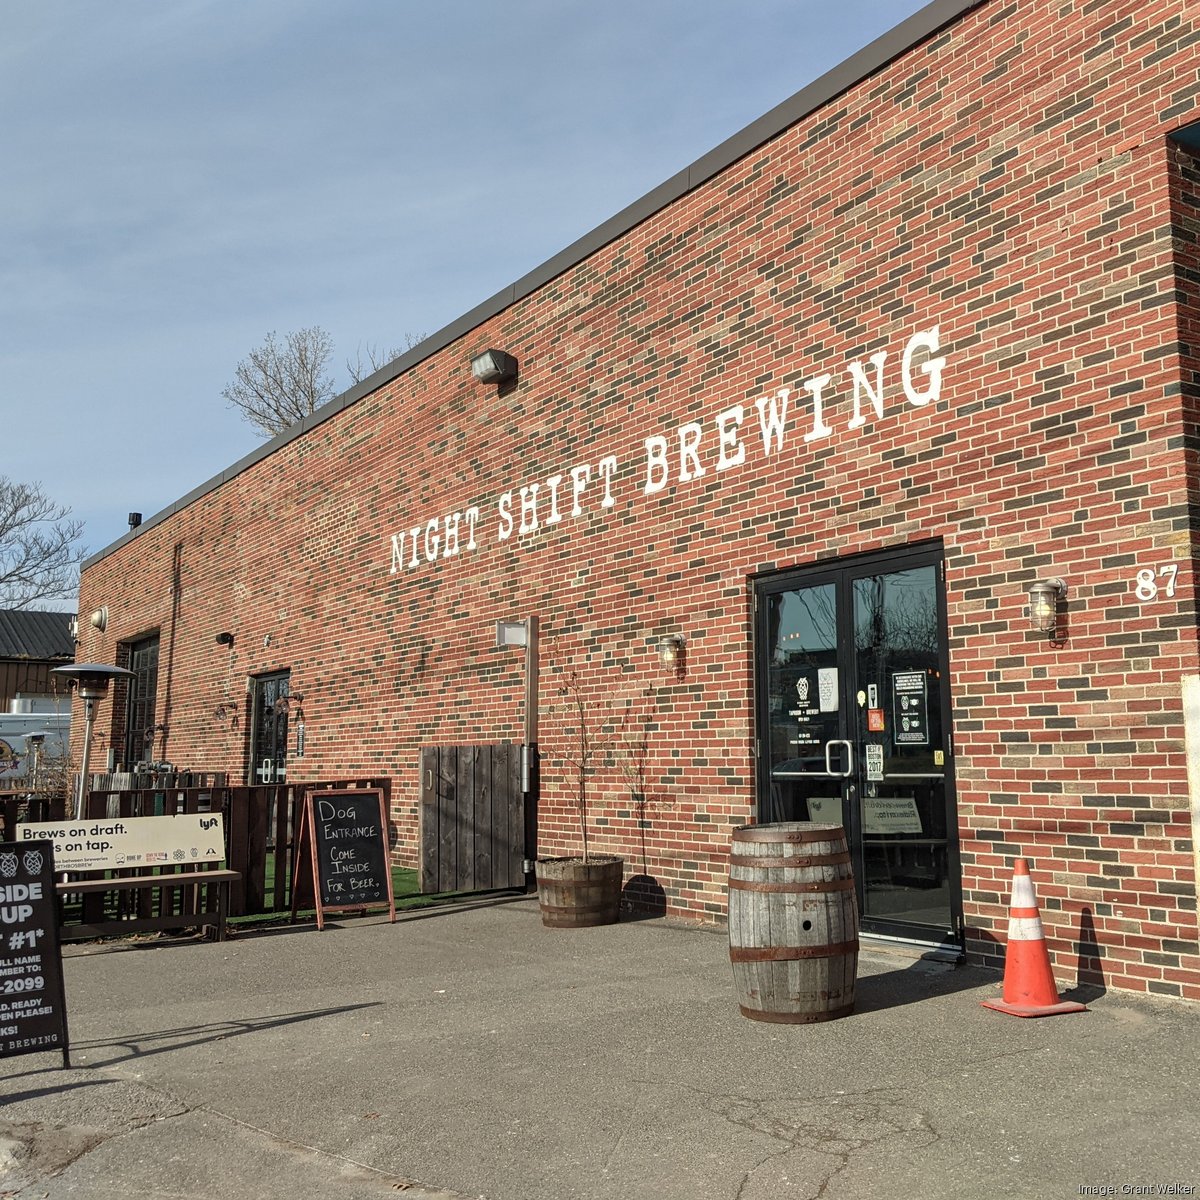 Night Shift Brewing to Cease Production at Everett MA Facility – NBC Boston